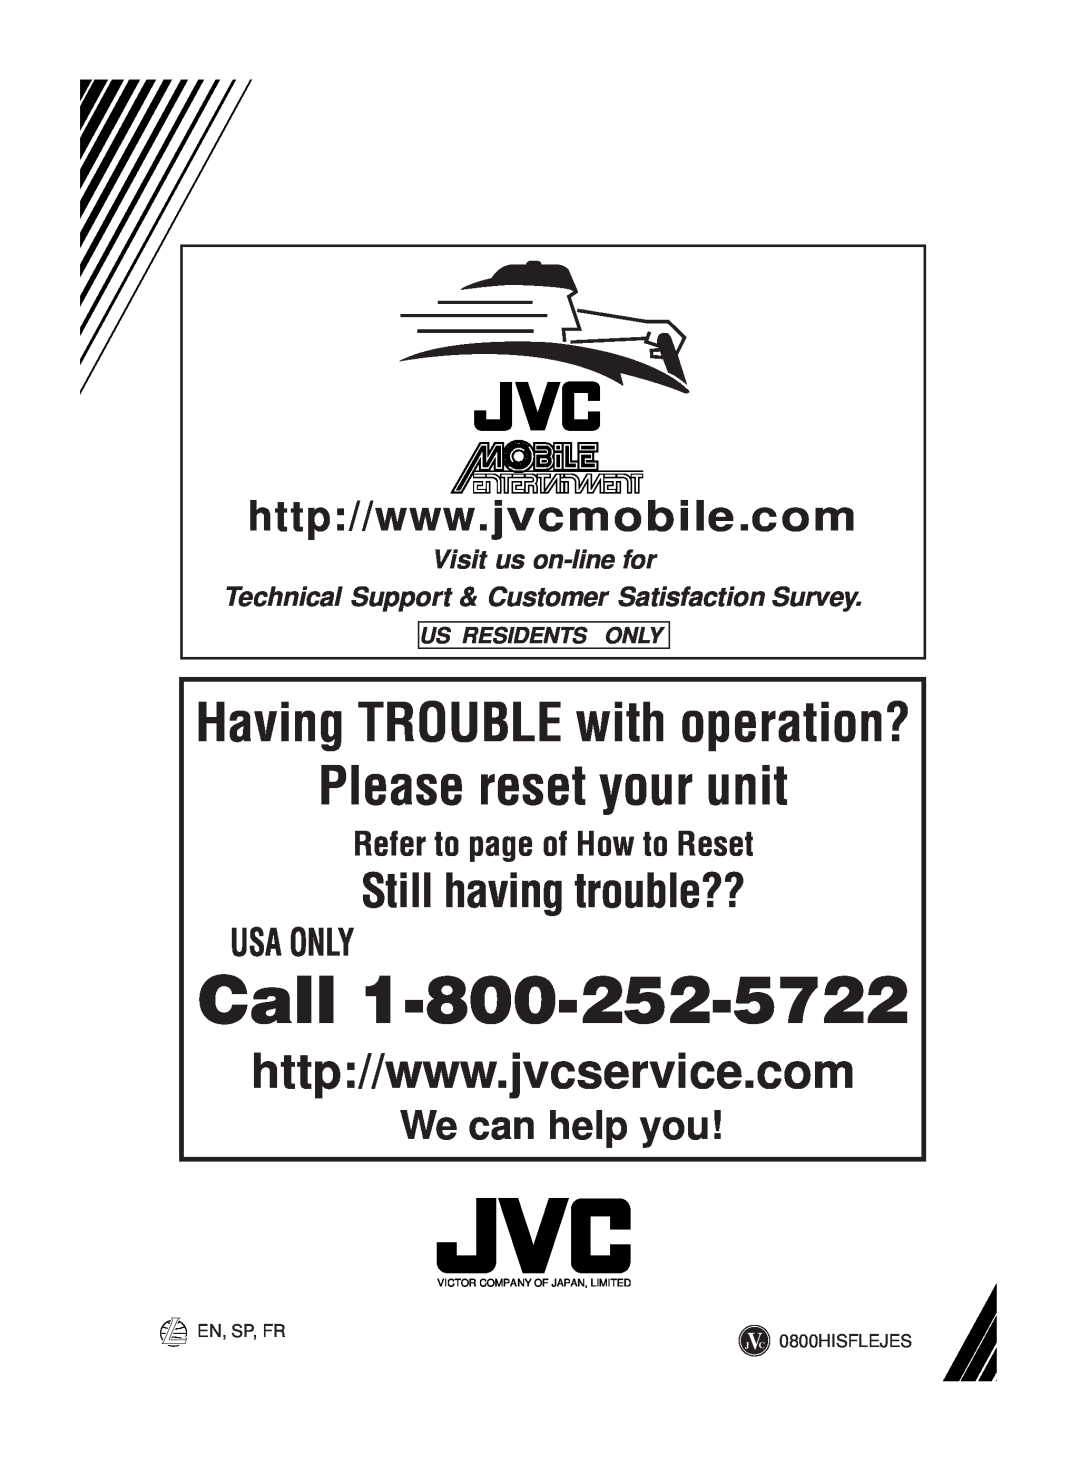 JVC KD-S620 Refer to page of How to Reset, Visit us on-line for Technical Support & Customer Satisfaction Survey, Call 